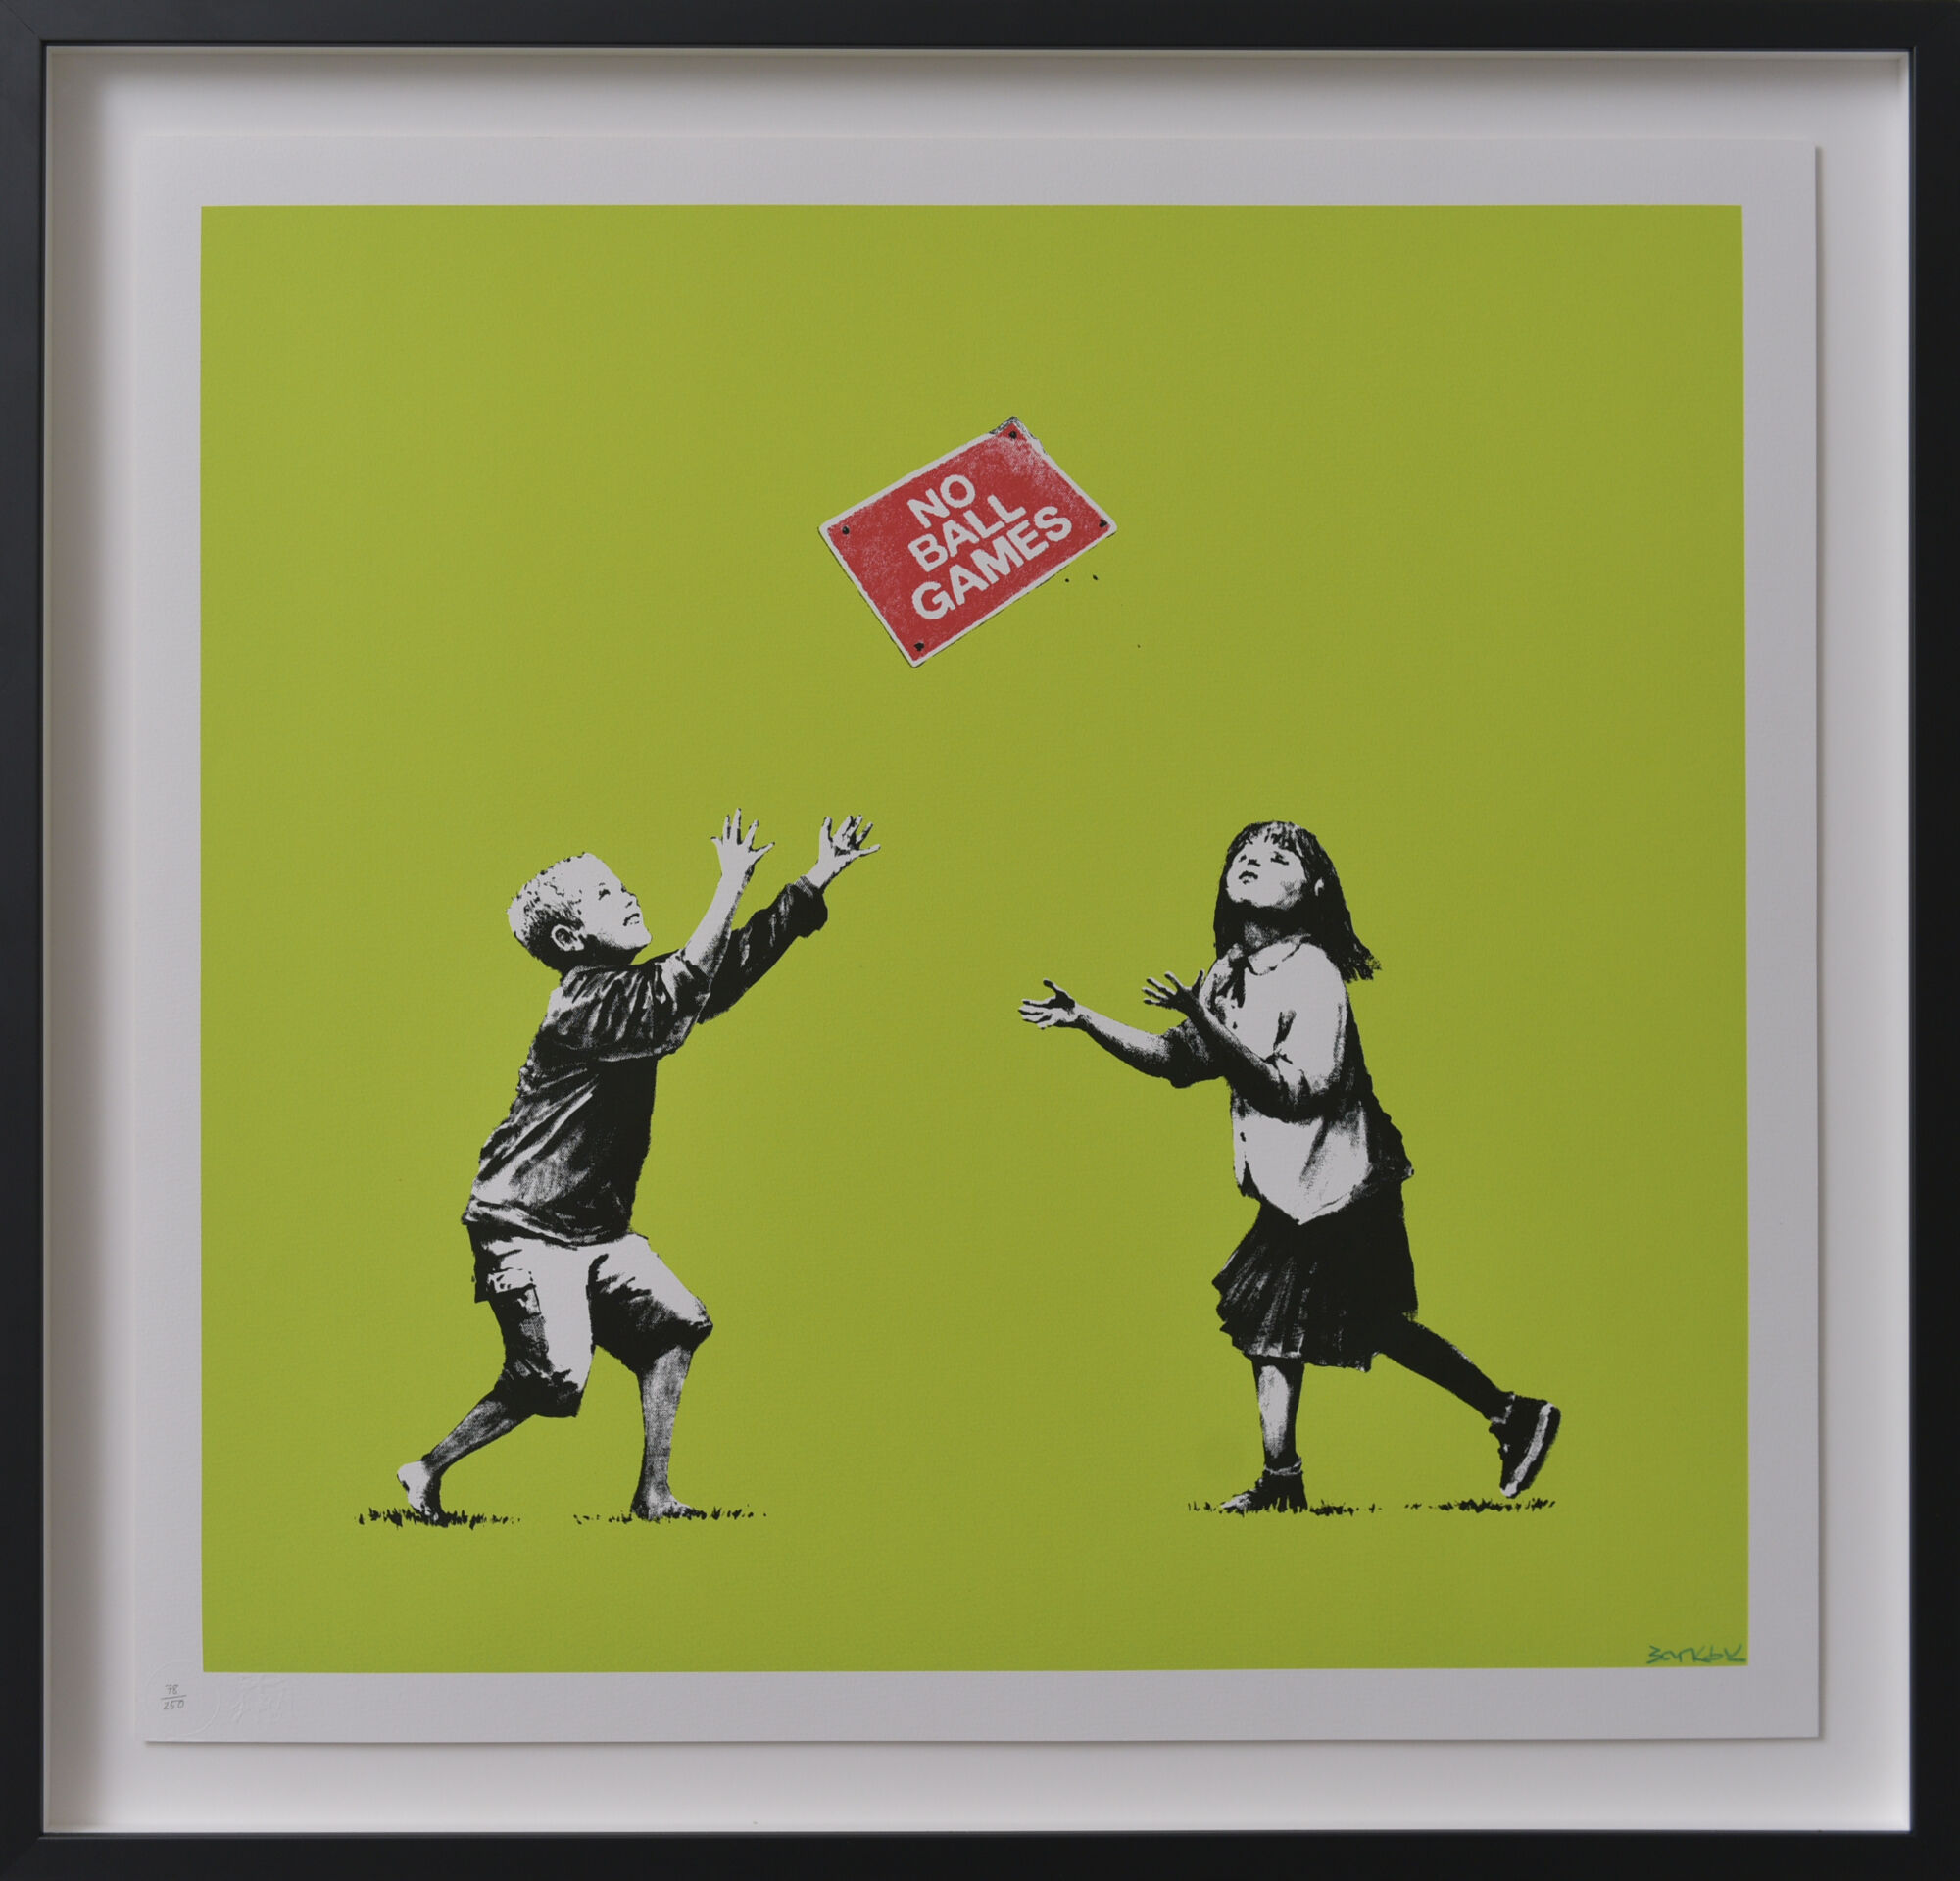 The Wick - Banksy, No Ball Games (Green), 2009